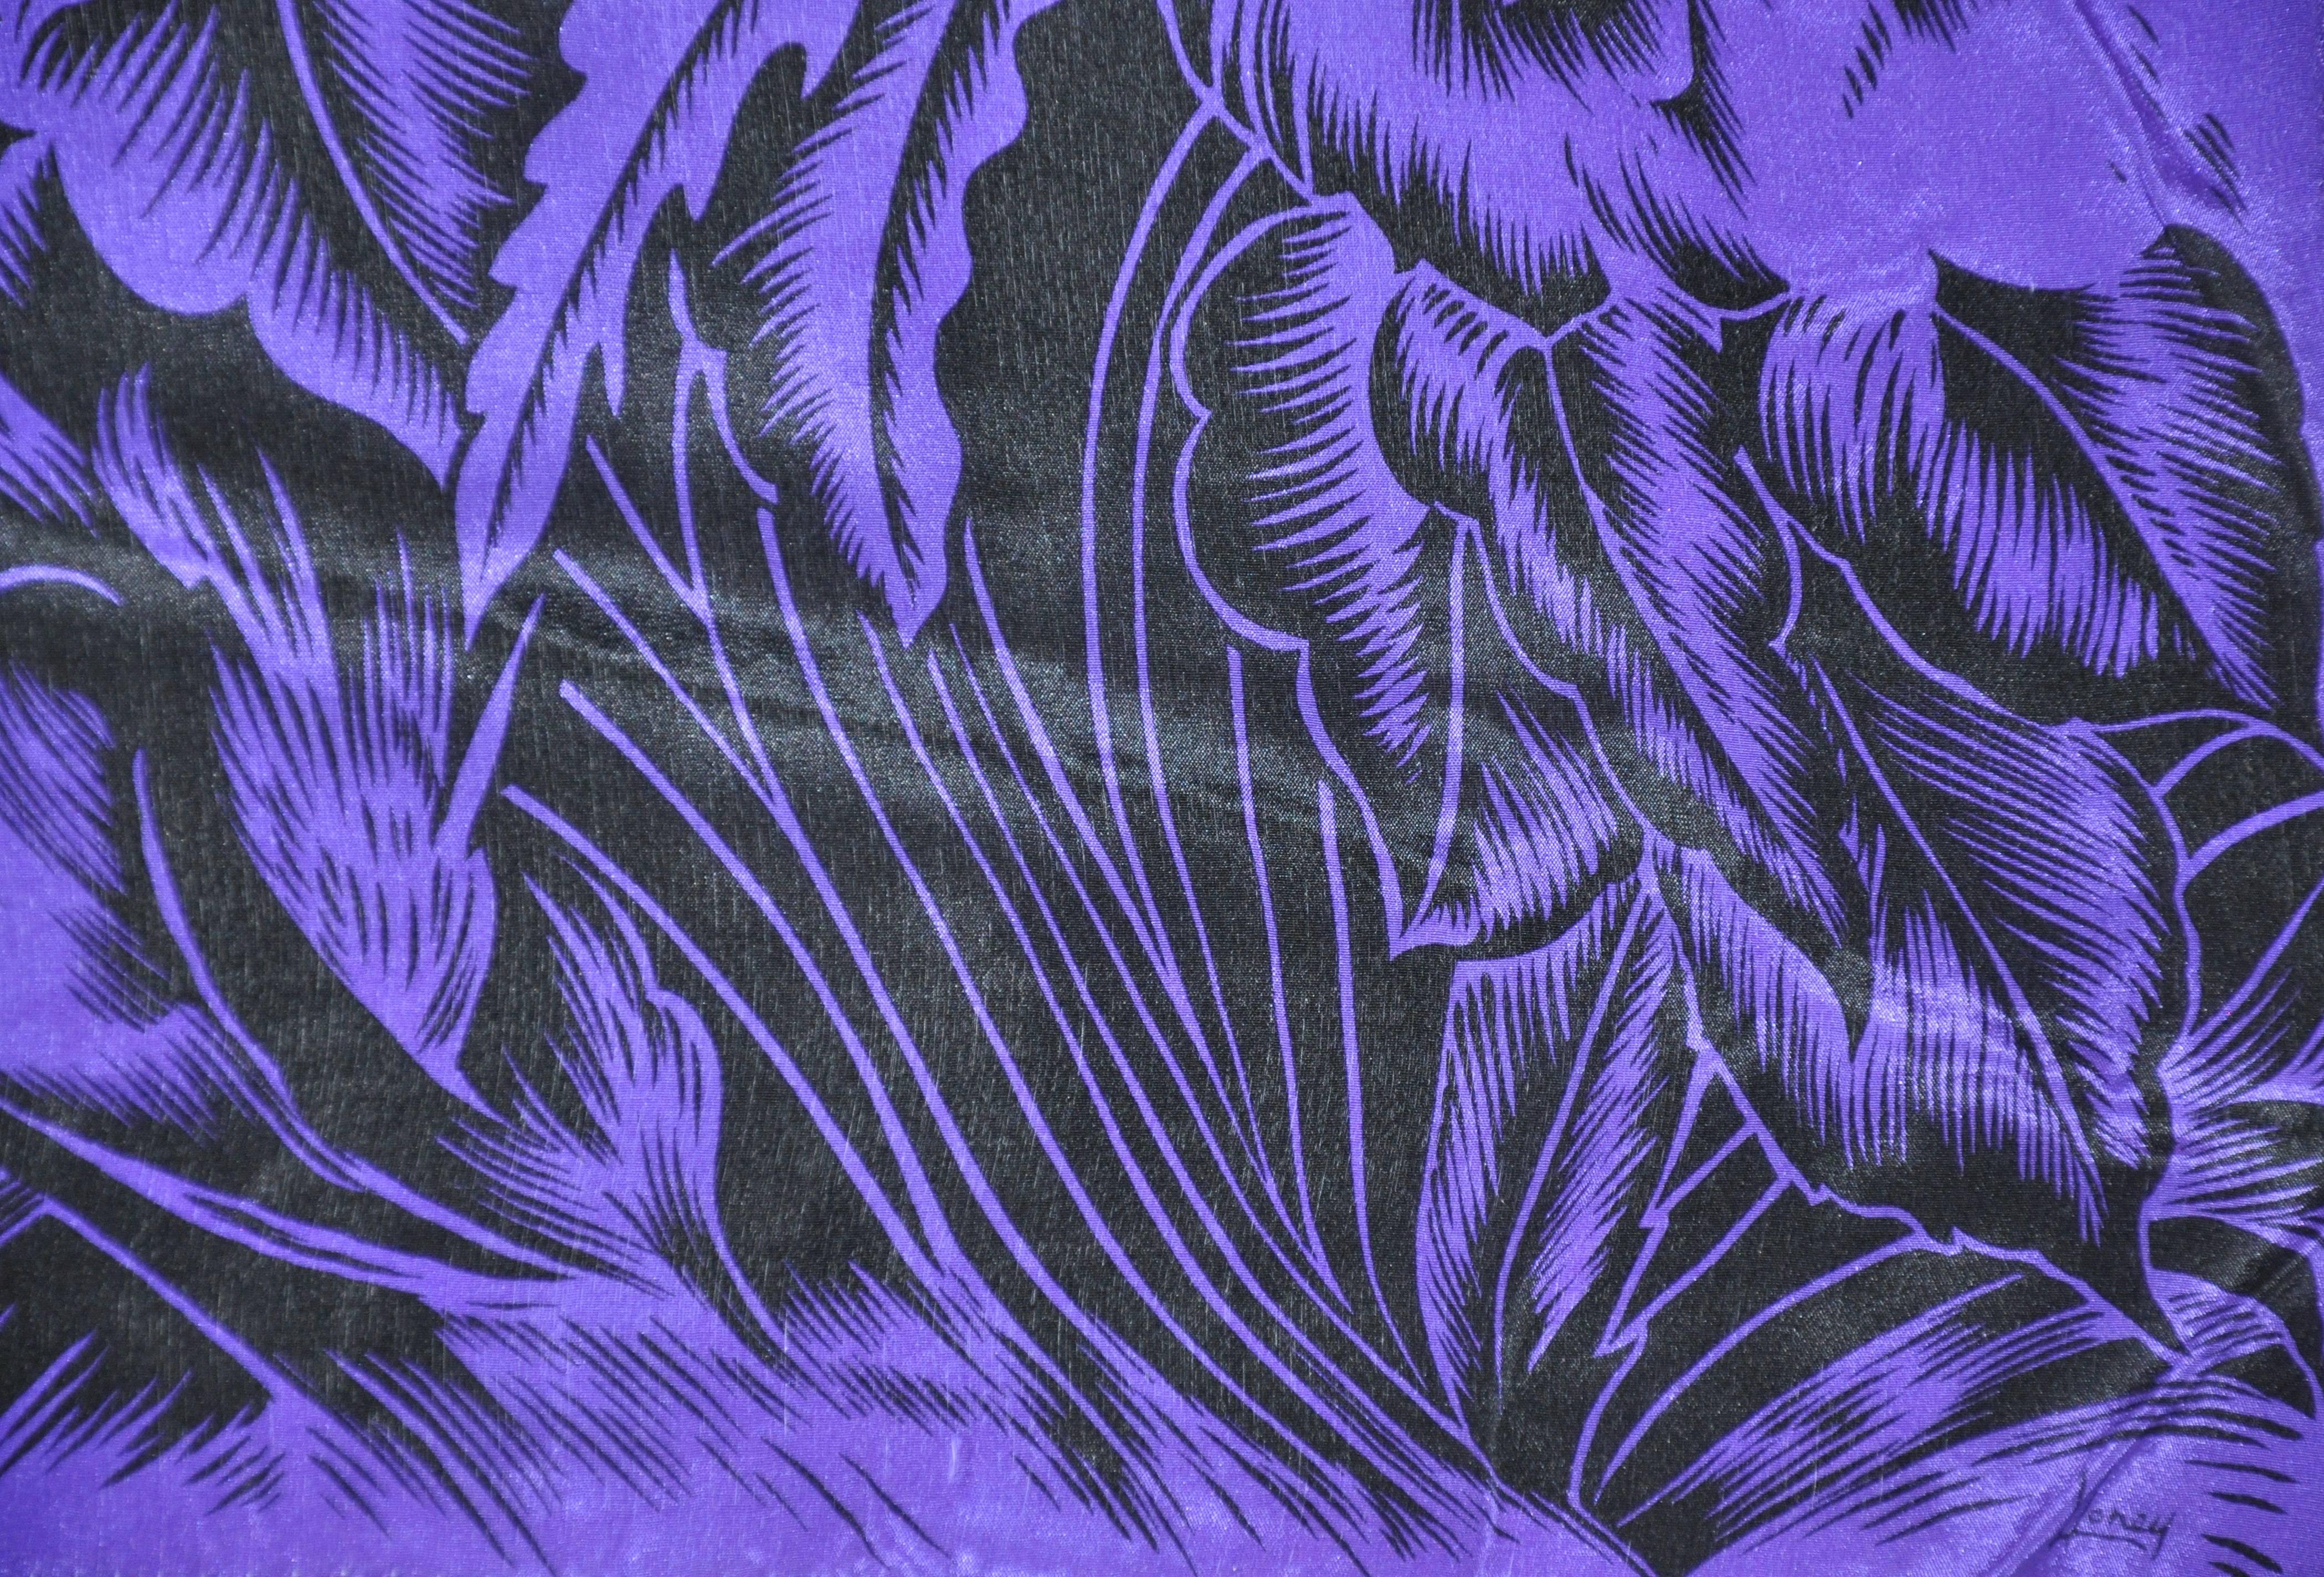 Honey wonderfully rich violet and black Bursting florals silk scarf accented with hand-rolled edges, measures 14 inches by 64 inches. Made in Japan.